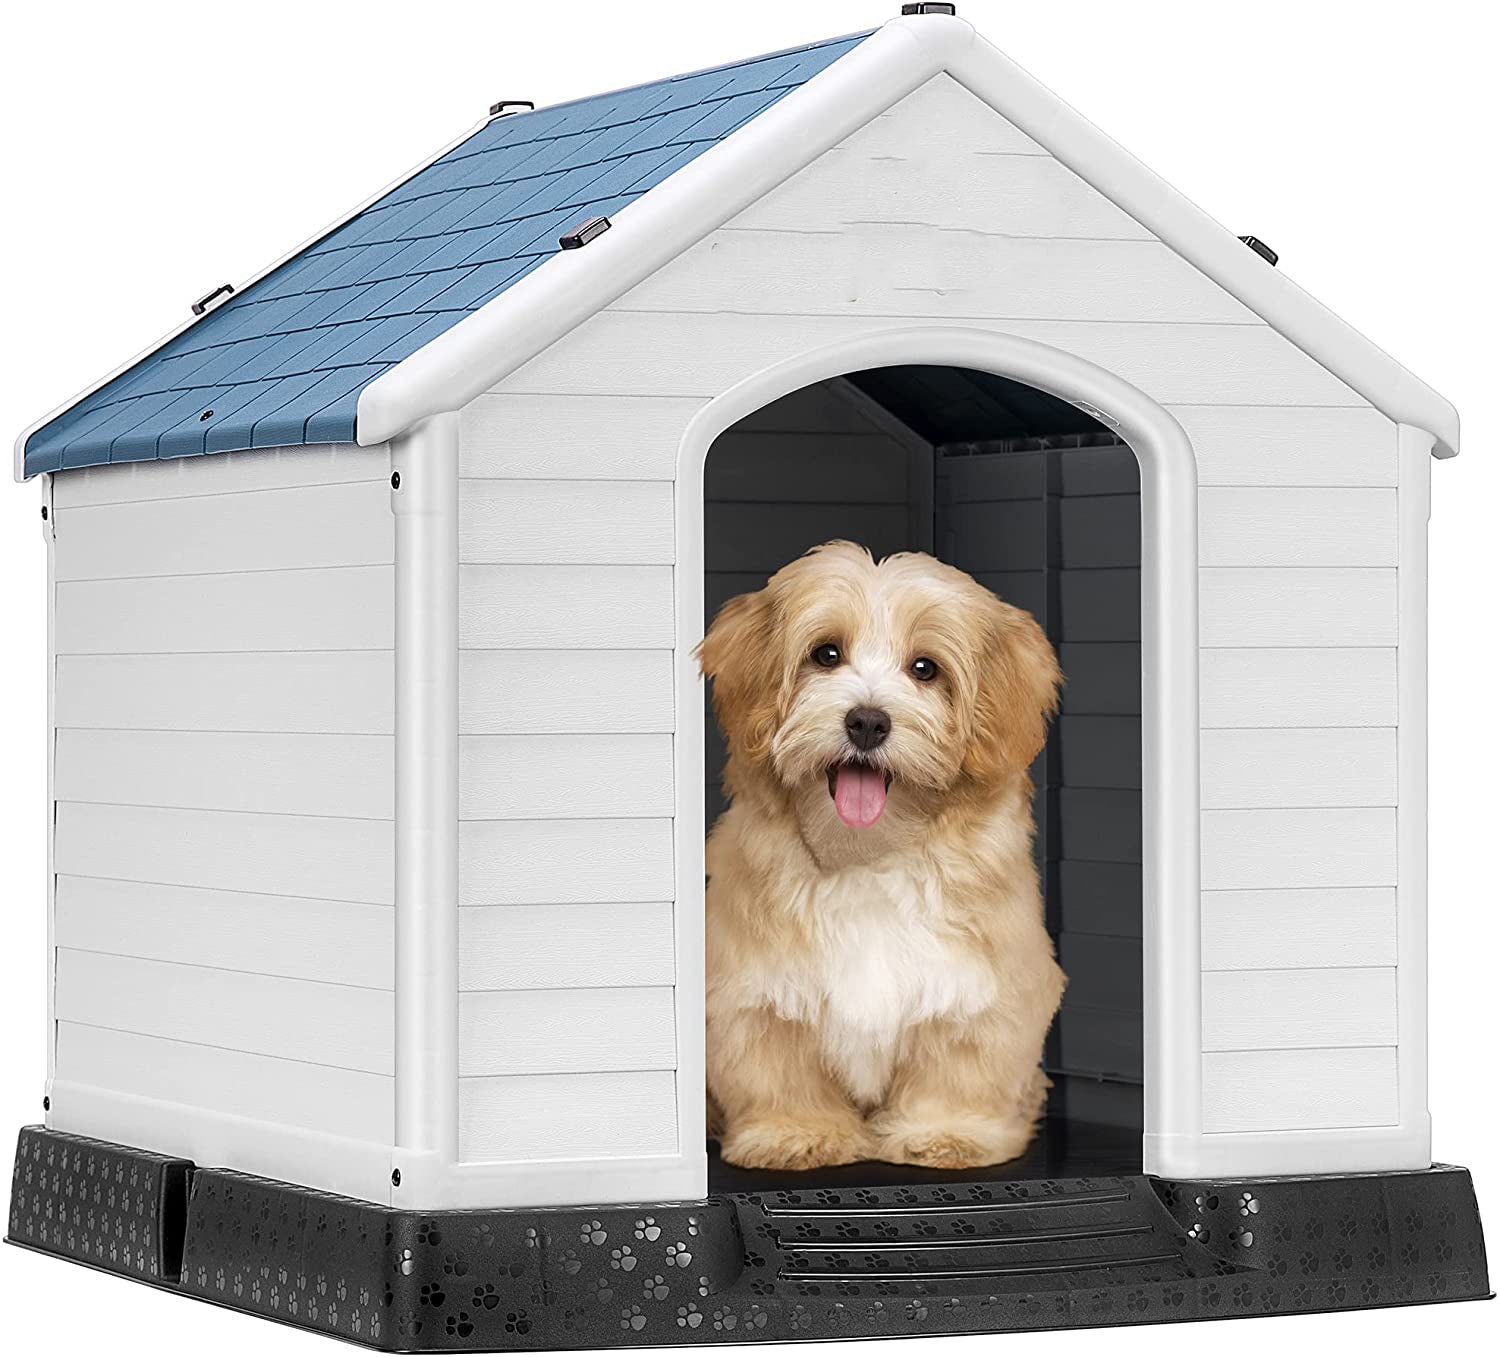 EXTFIT Durable Waterproof Plastic Pet Dog House Indoor Outdoor Puppy Shelter Kennel with Air Vents and Elevated Floor